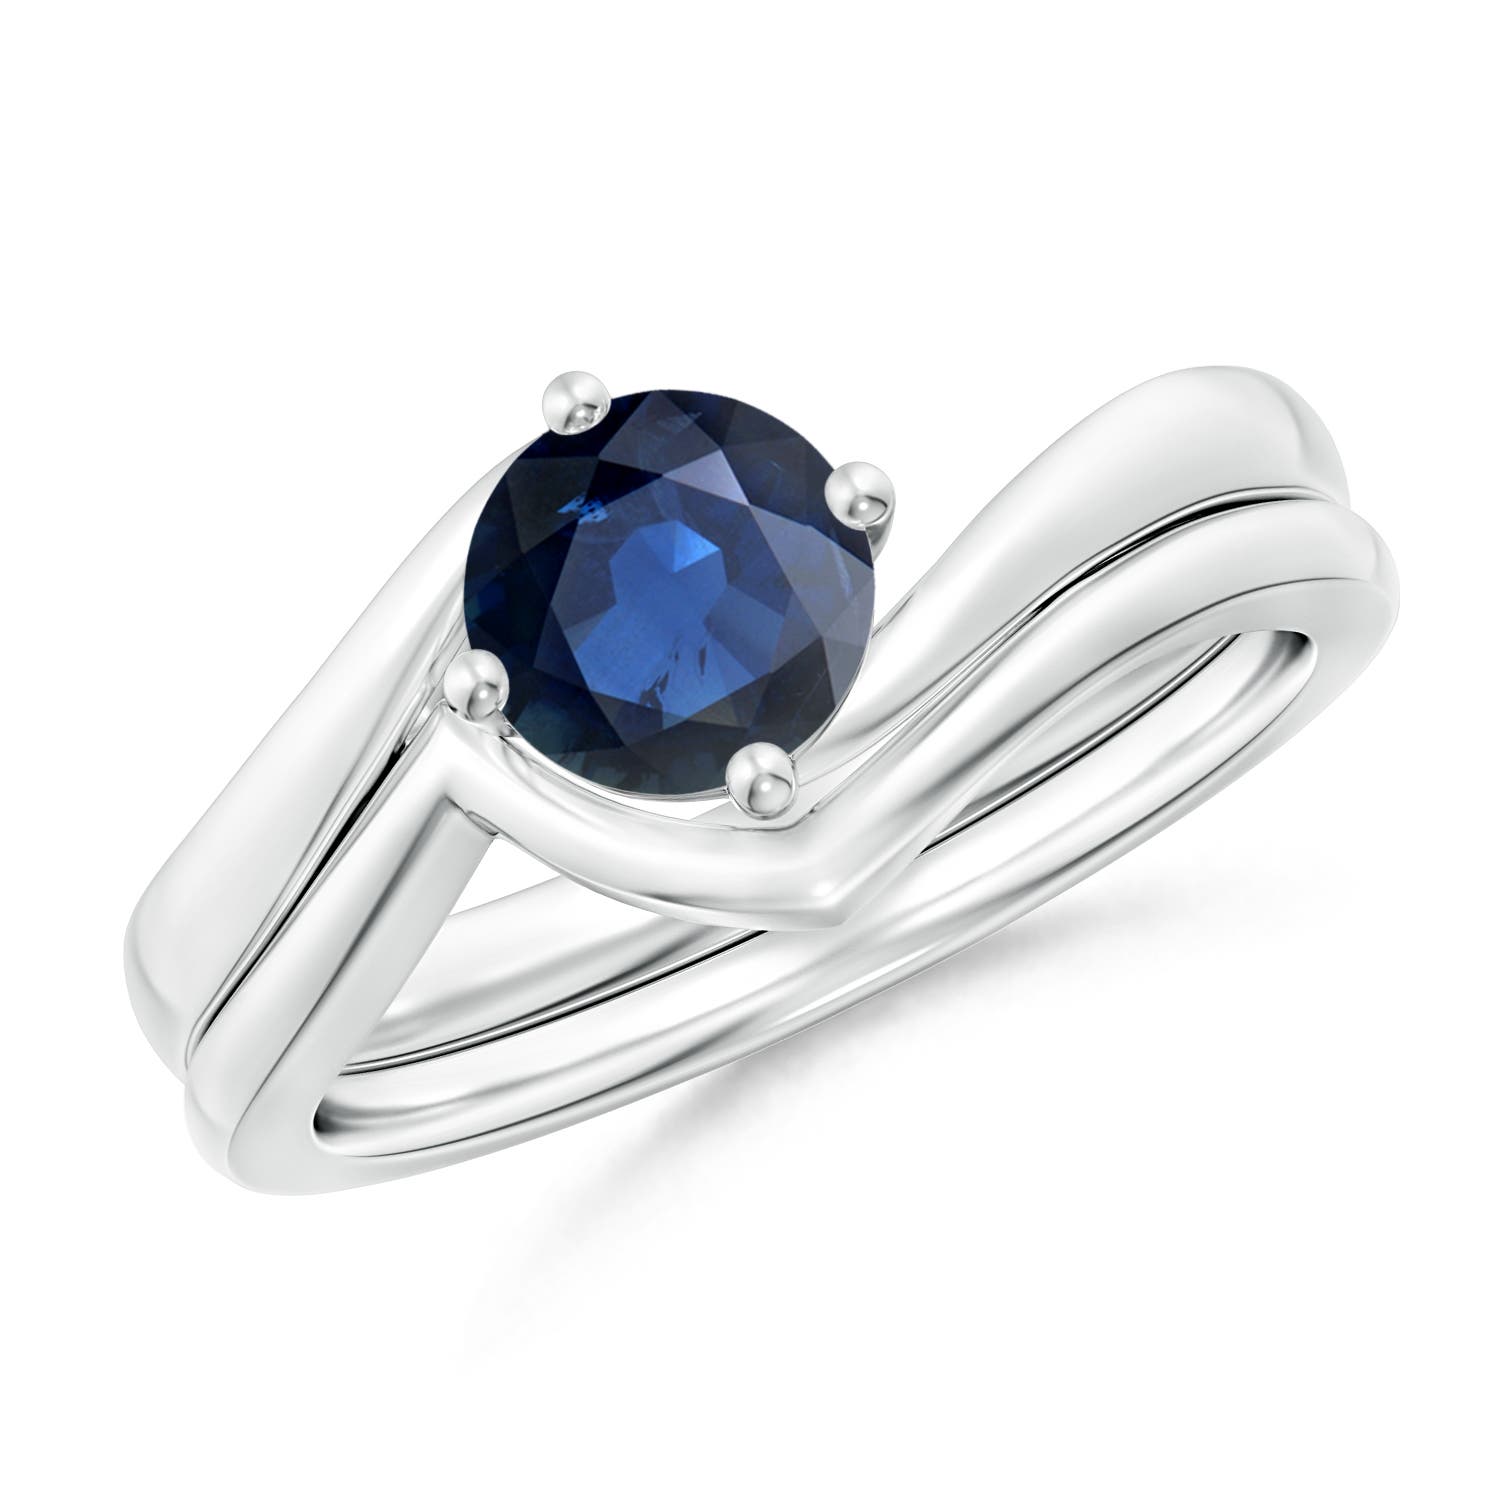 AA - Blue Sapphire / 1 CT / 14 KT White Gold